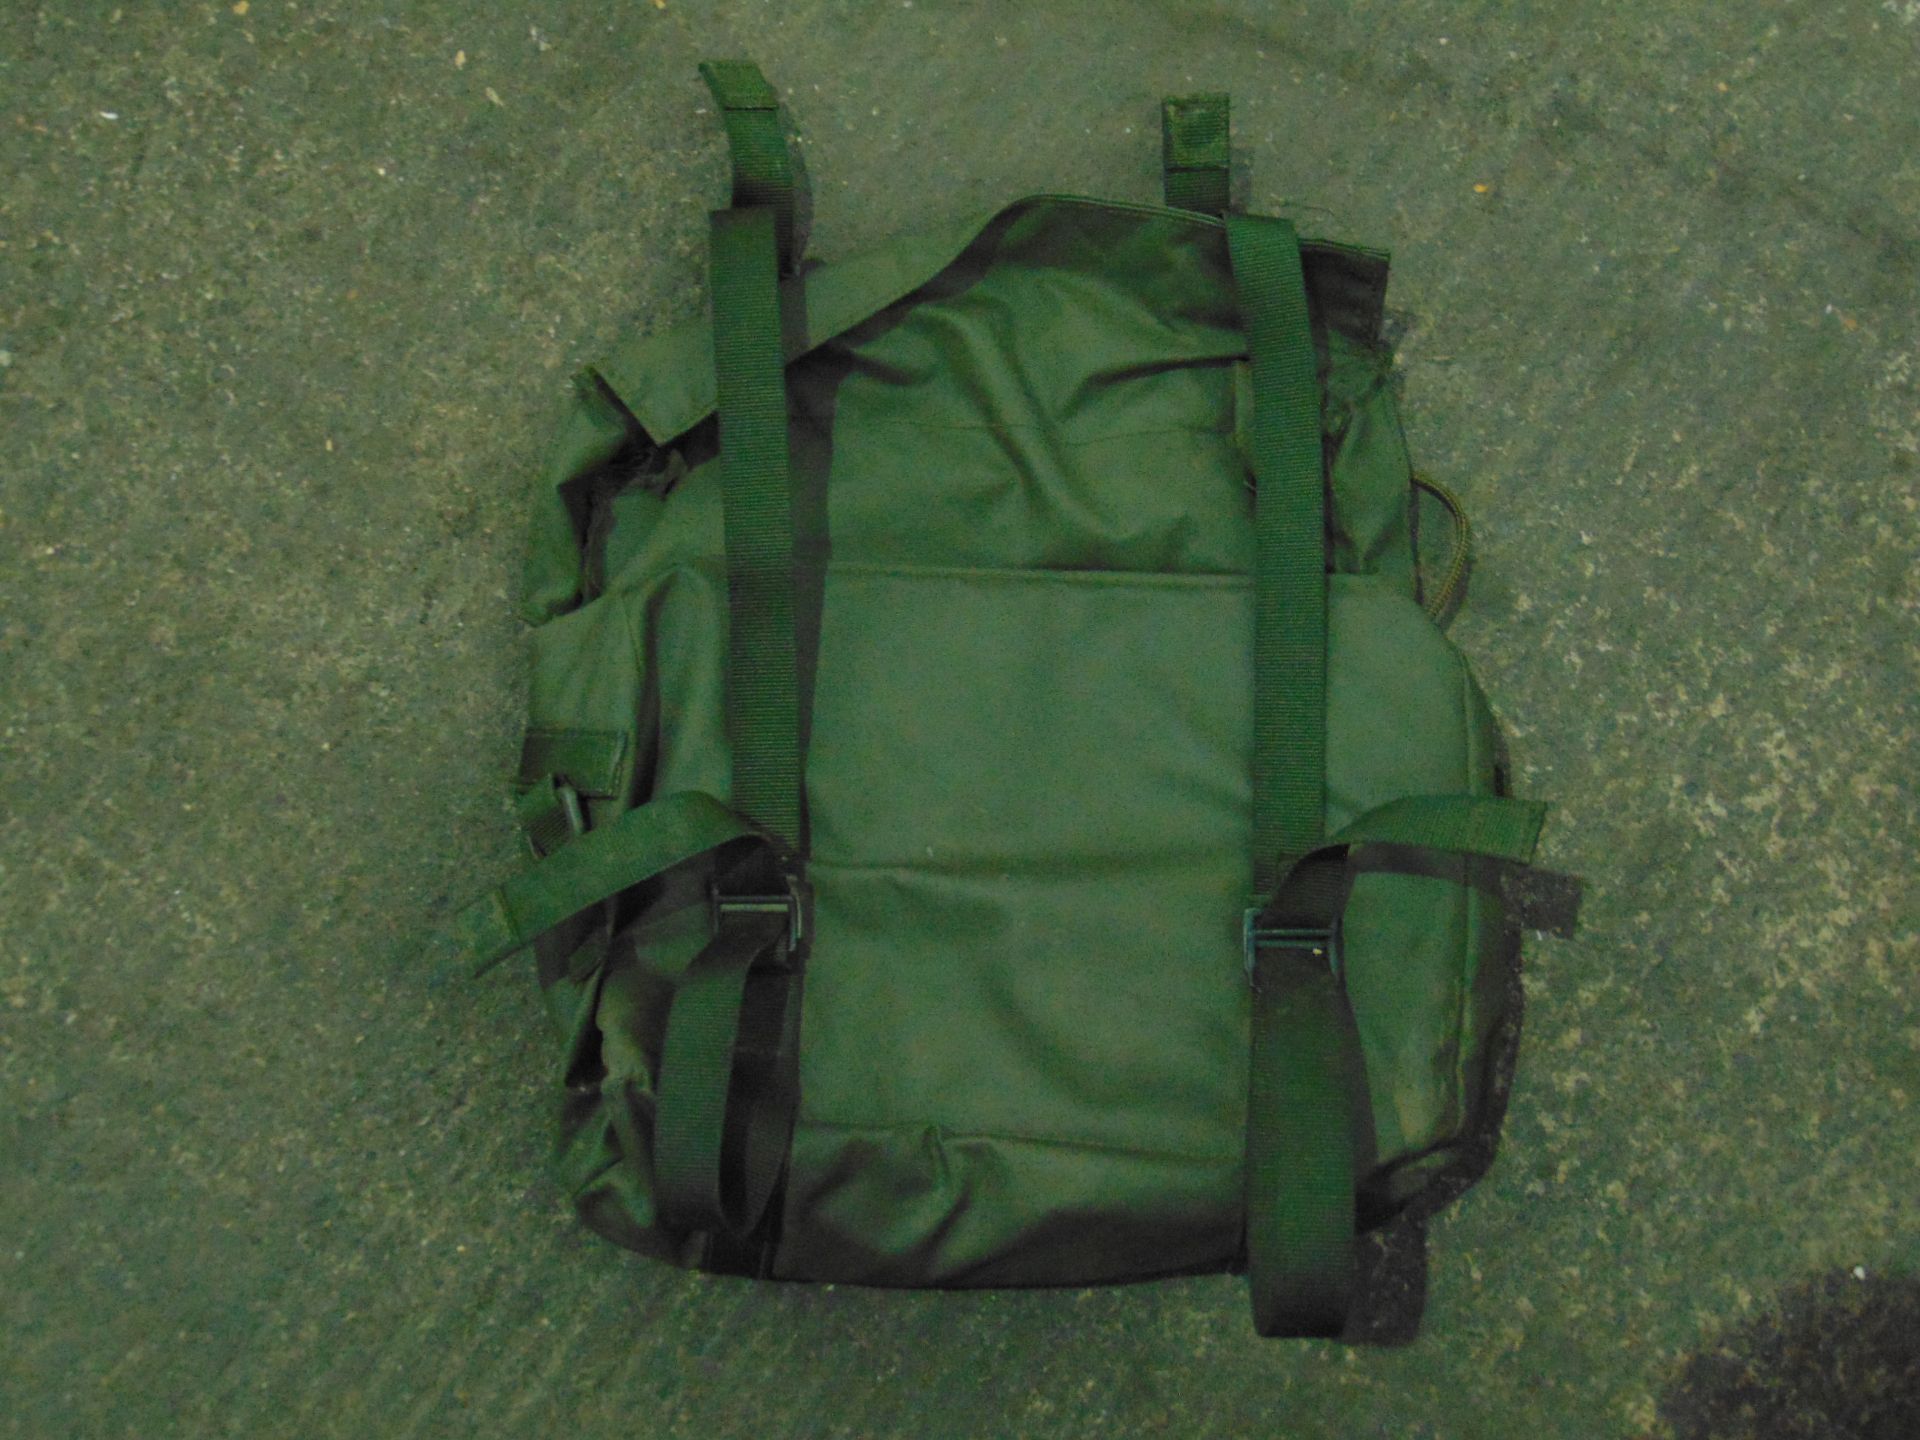 1X STILLAGE OF COMMS BAGS, ANTENA COVERS, ETC - Image 7 of 9